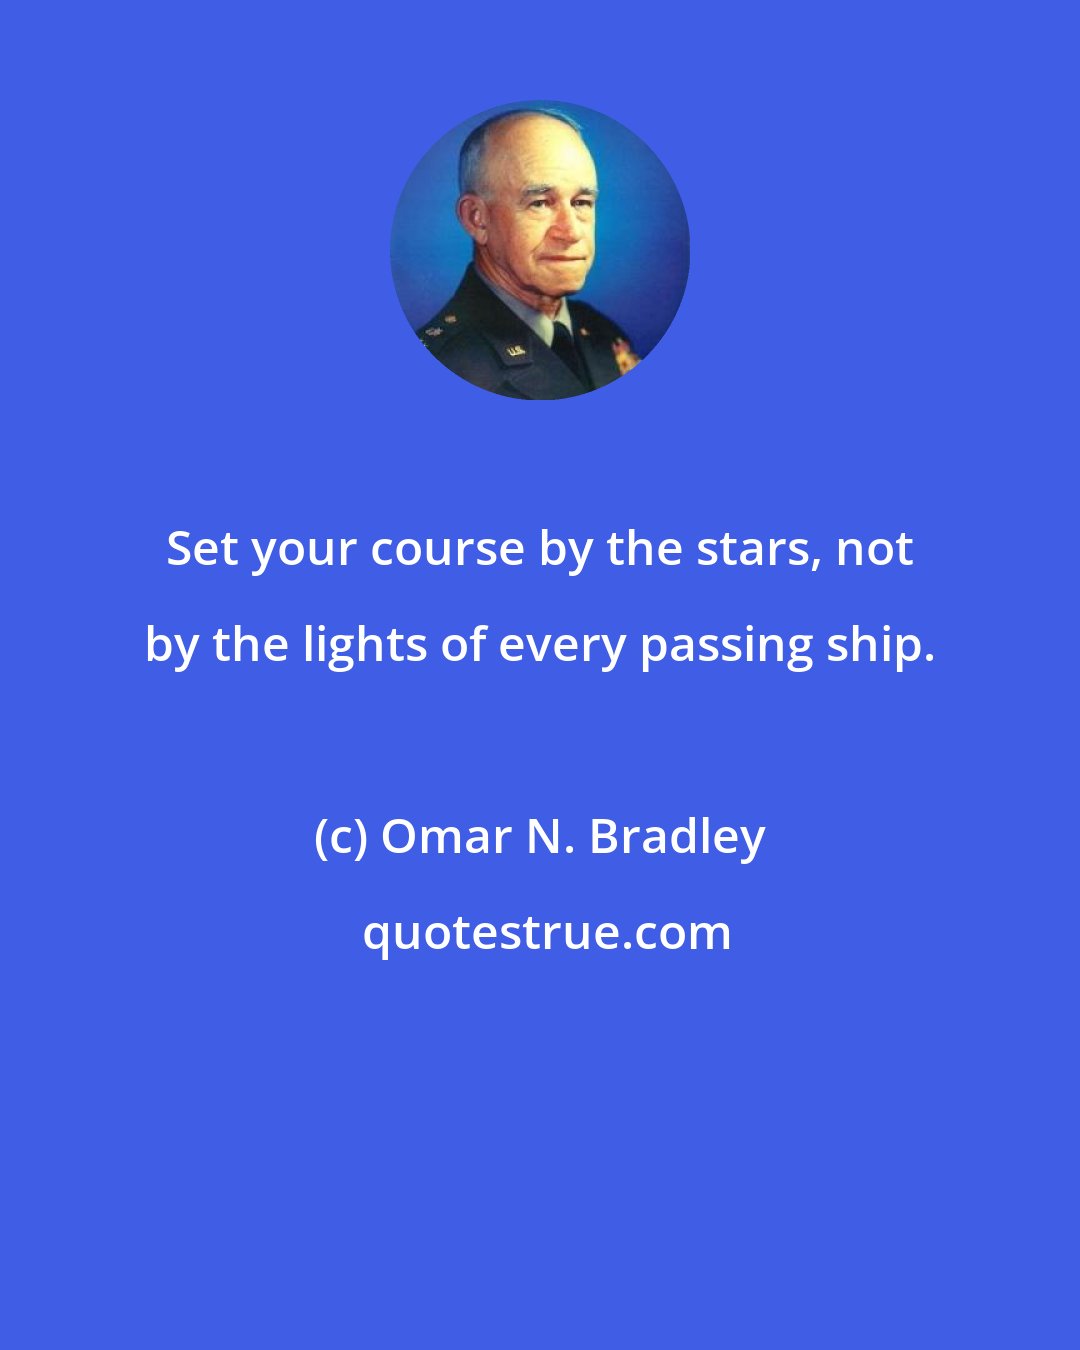 Omar N. Bradley: Set your course by the stars, not by the lights of every passing ship.